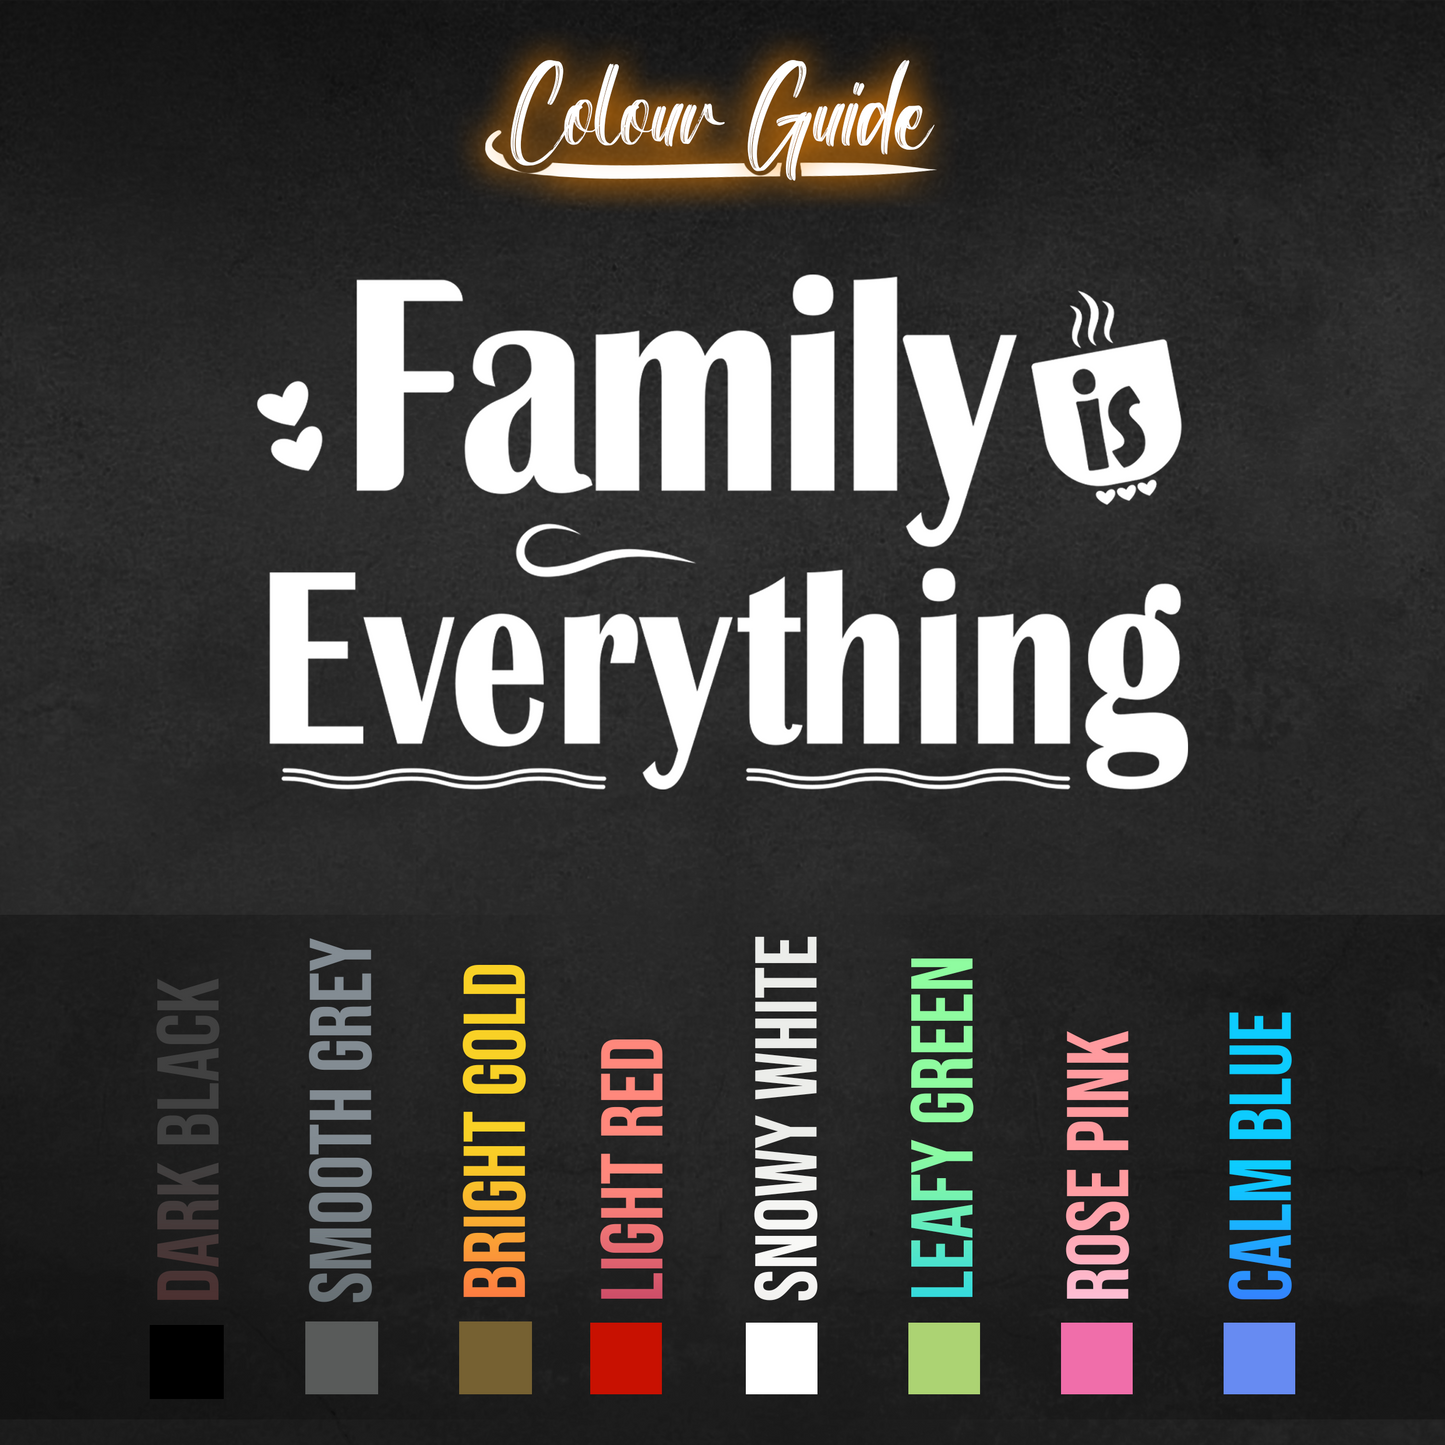 Family is Everything Wall Sticker Decal